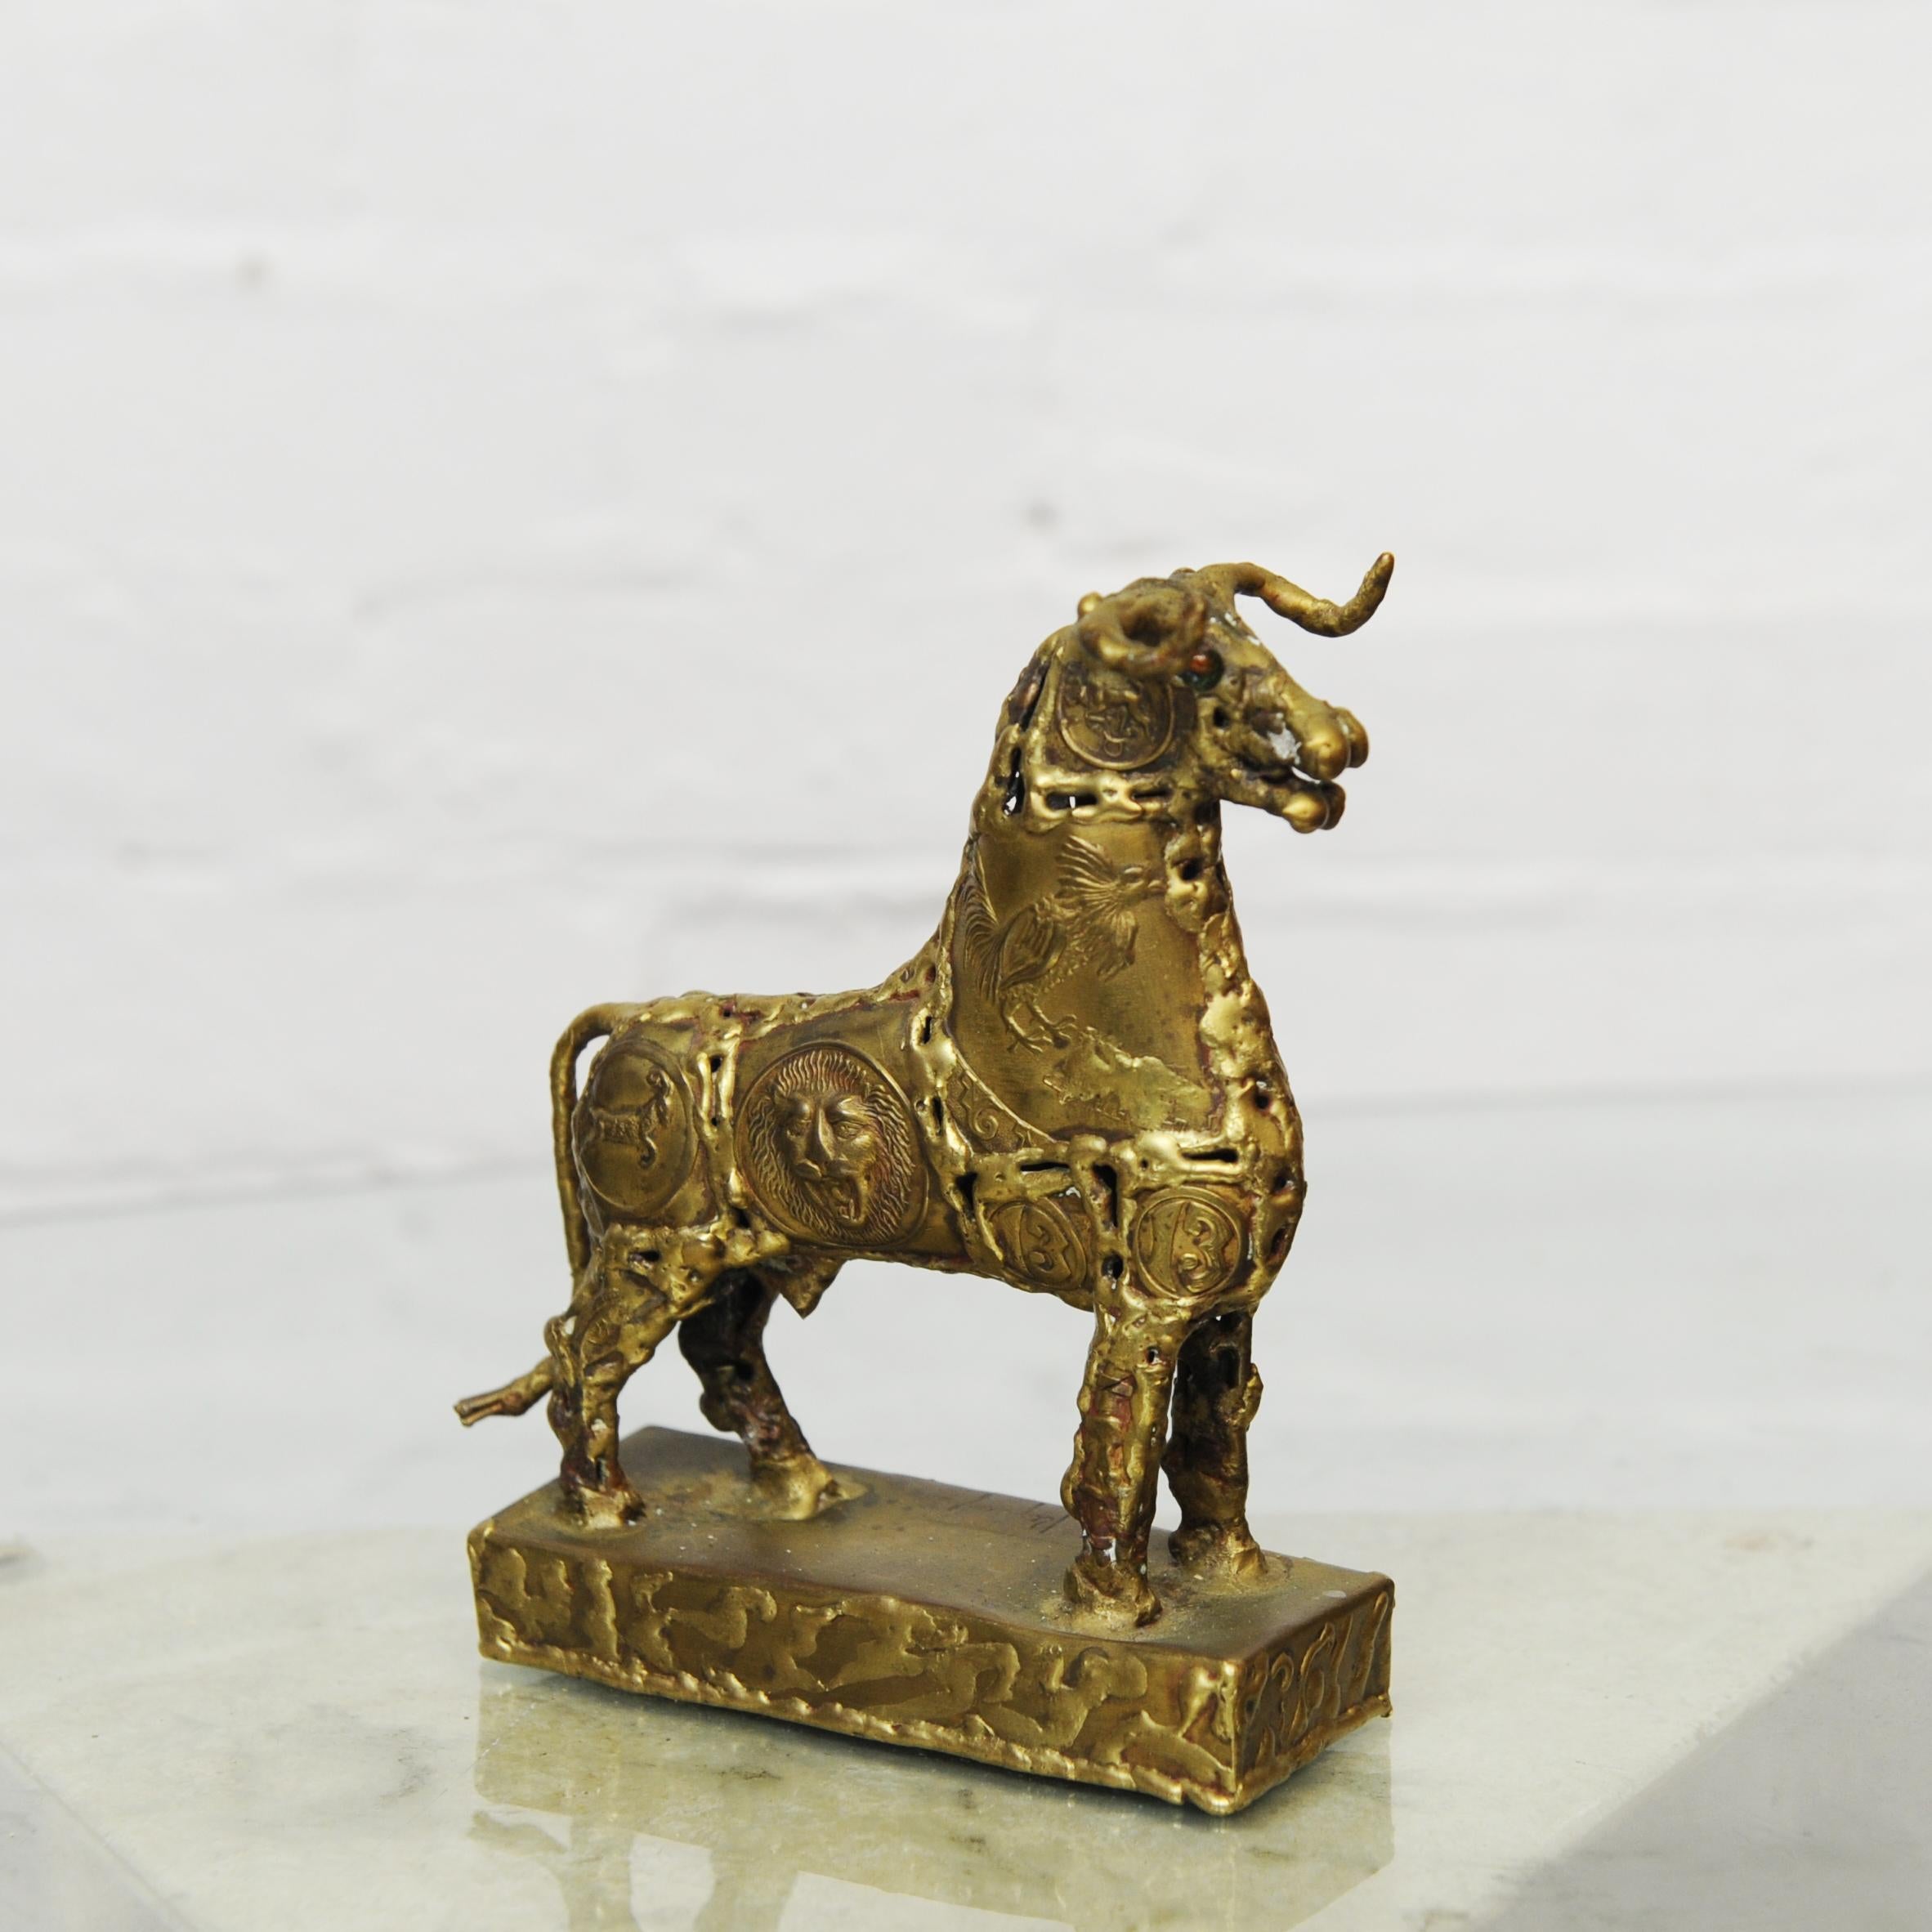 Brutalist Metal Sculpture of a Brass Bull by Pal Kepenyes, 1970s For Sale 1